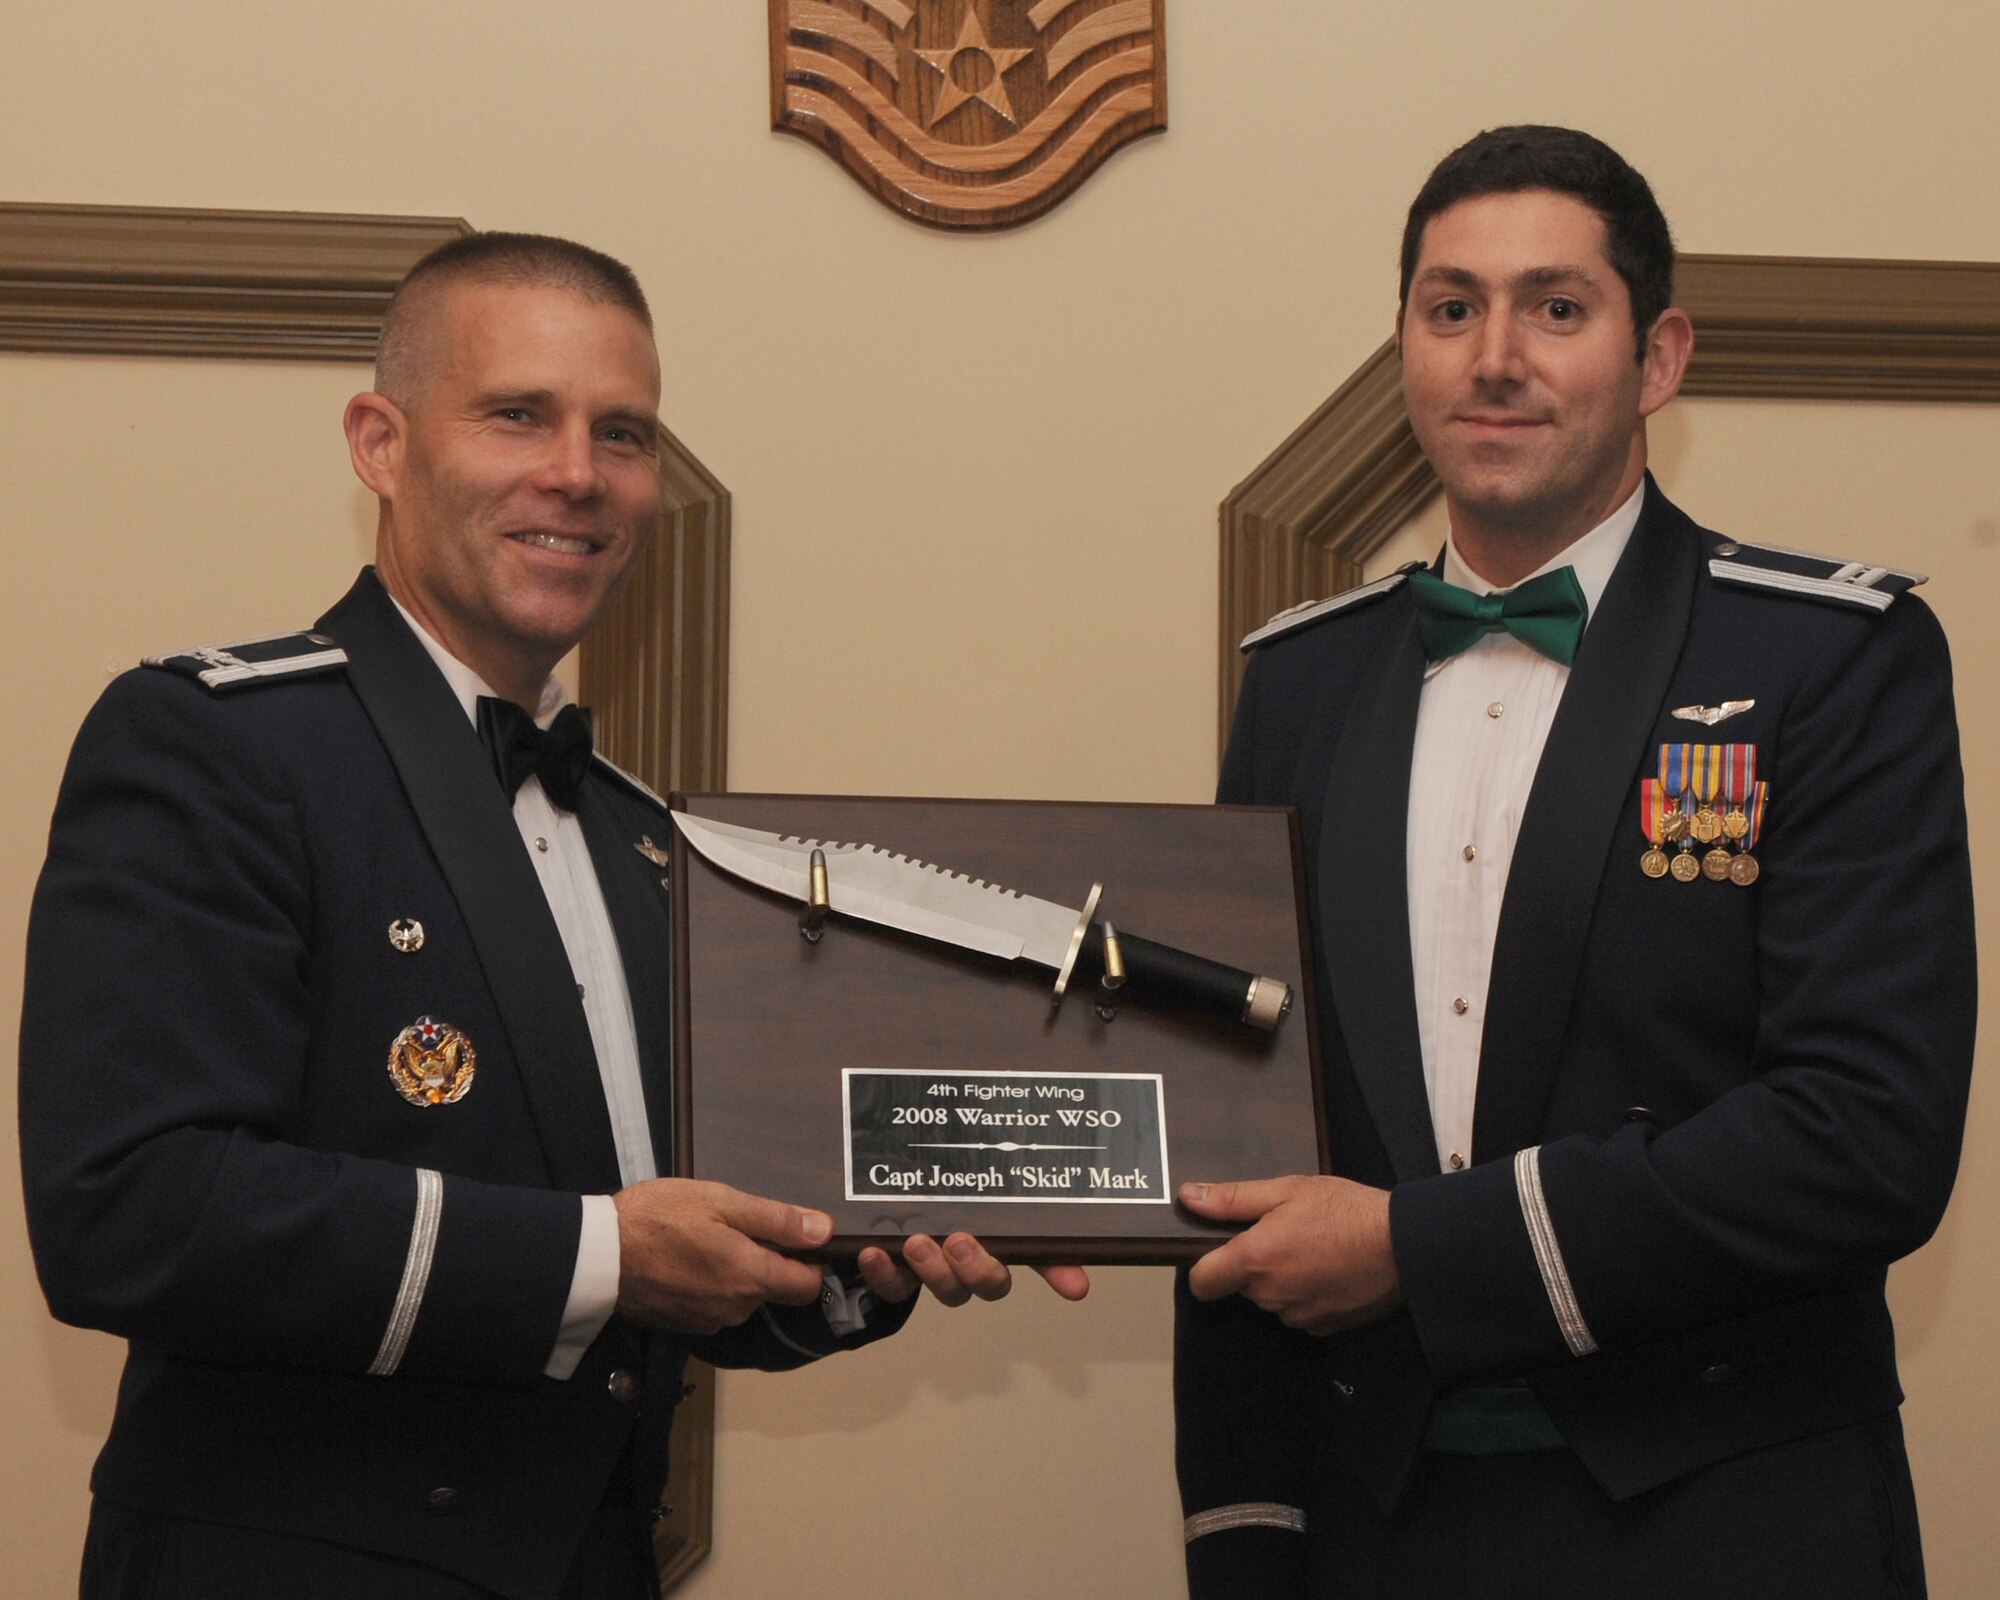 4th Fighter Wing commander Colonel Steve Kwast, presents Captain Joseph Mark with an award for warrior weapons systems officer. Capt Mark is the wing's warrior wso for 2007.